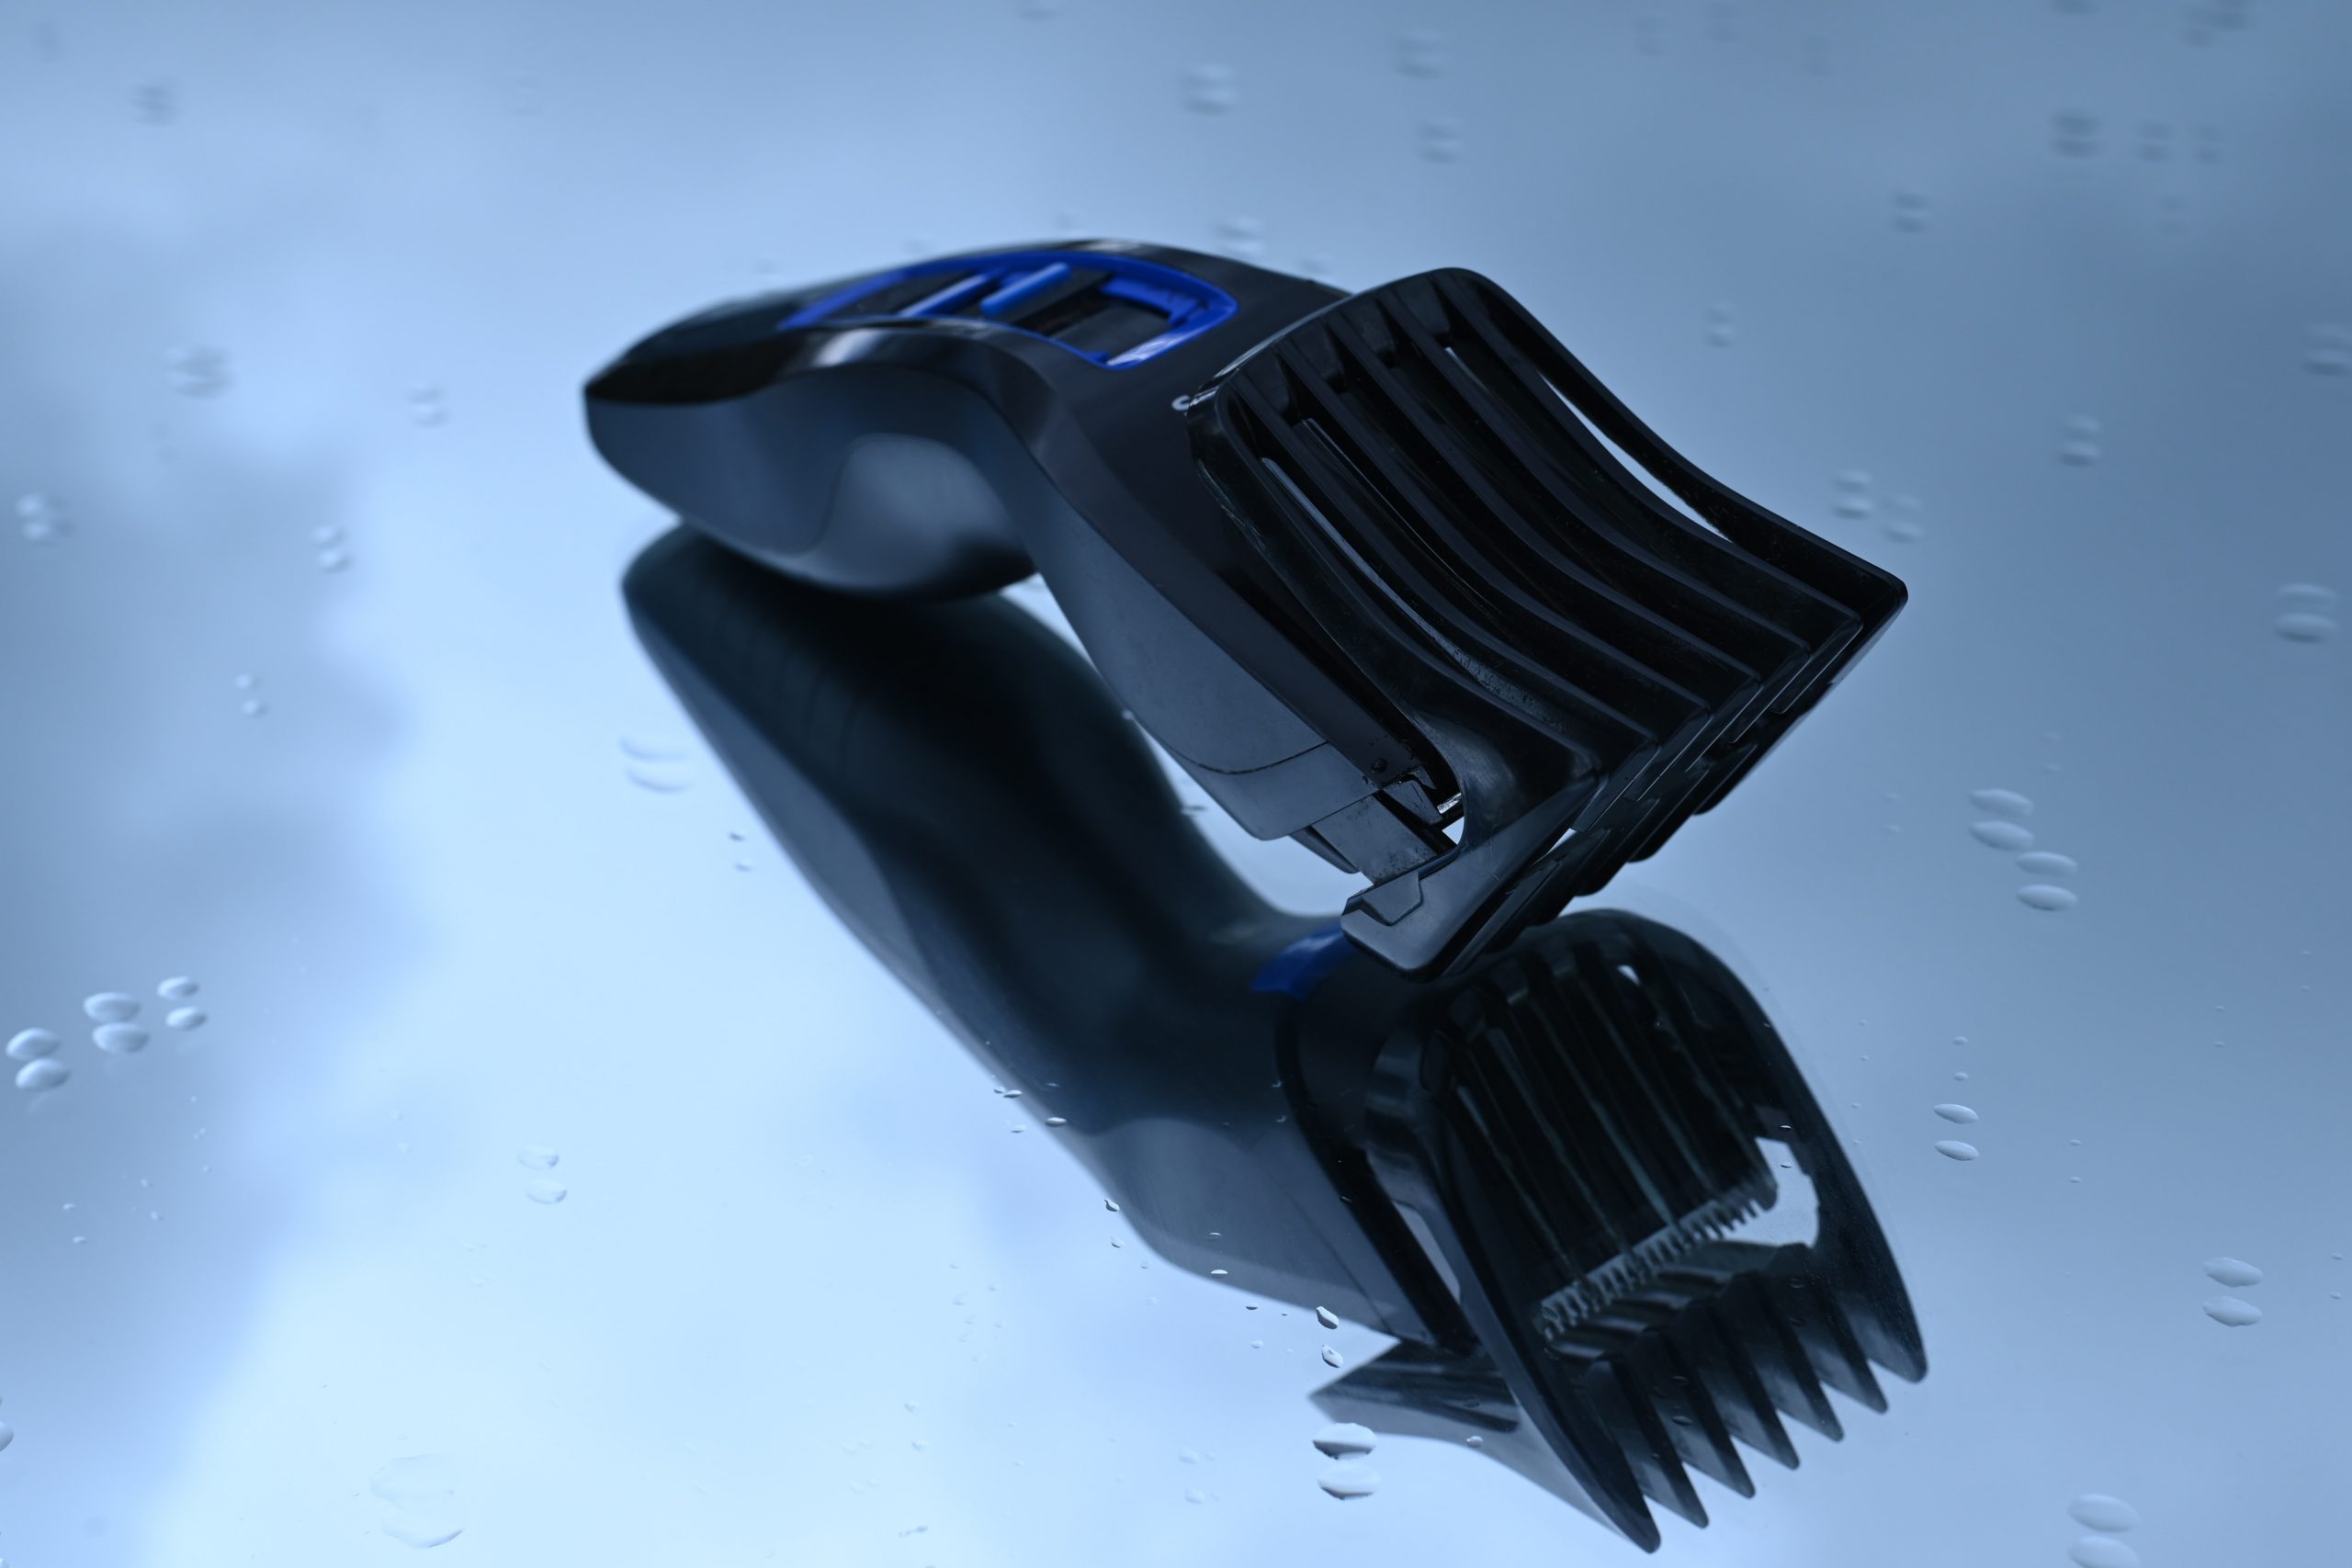 A thumbnail image of a shaver with clippers for adverting concept